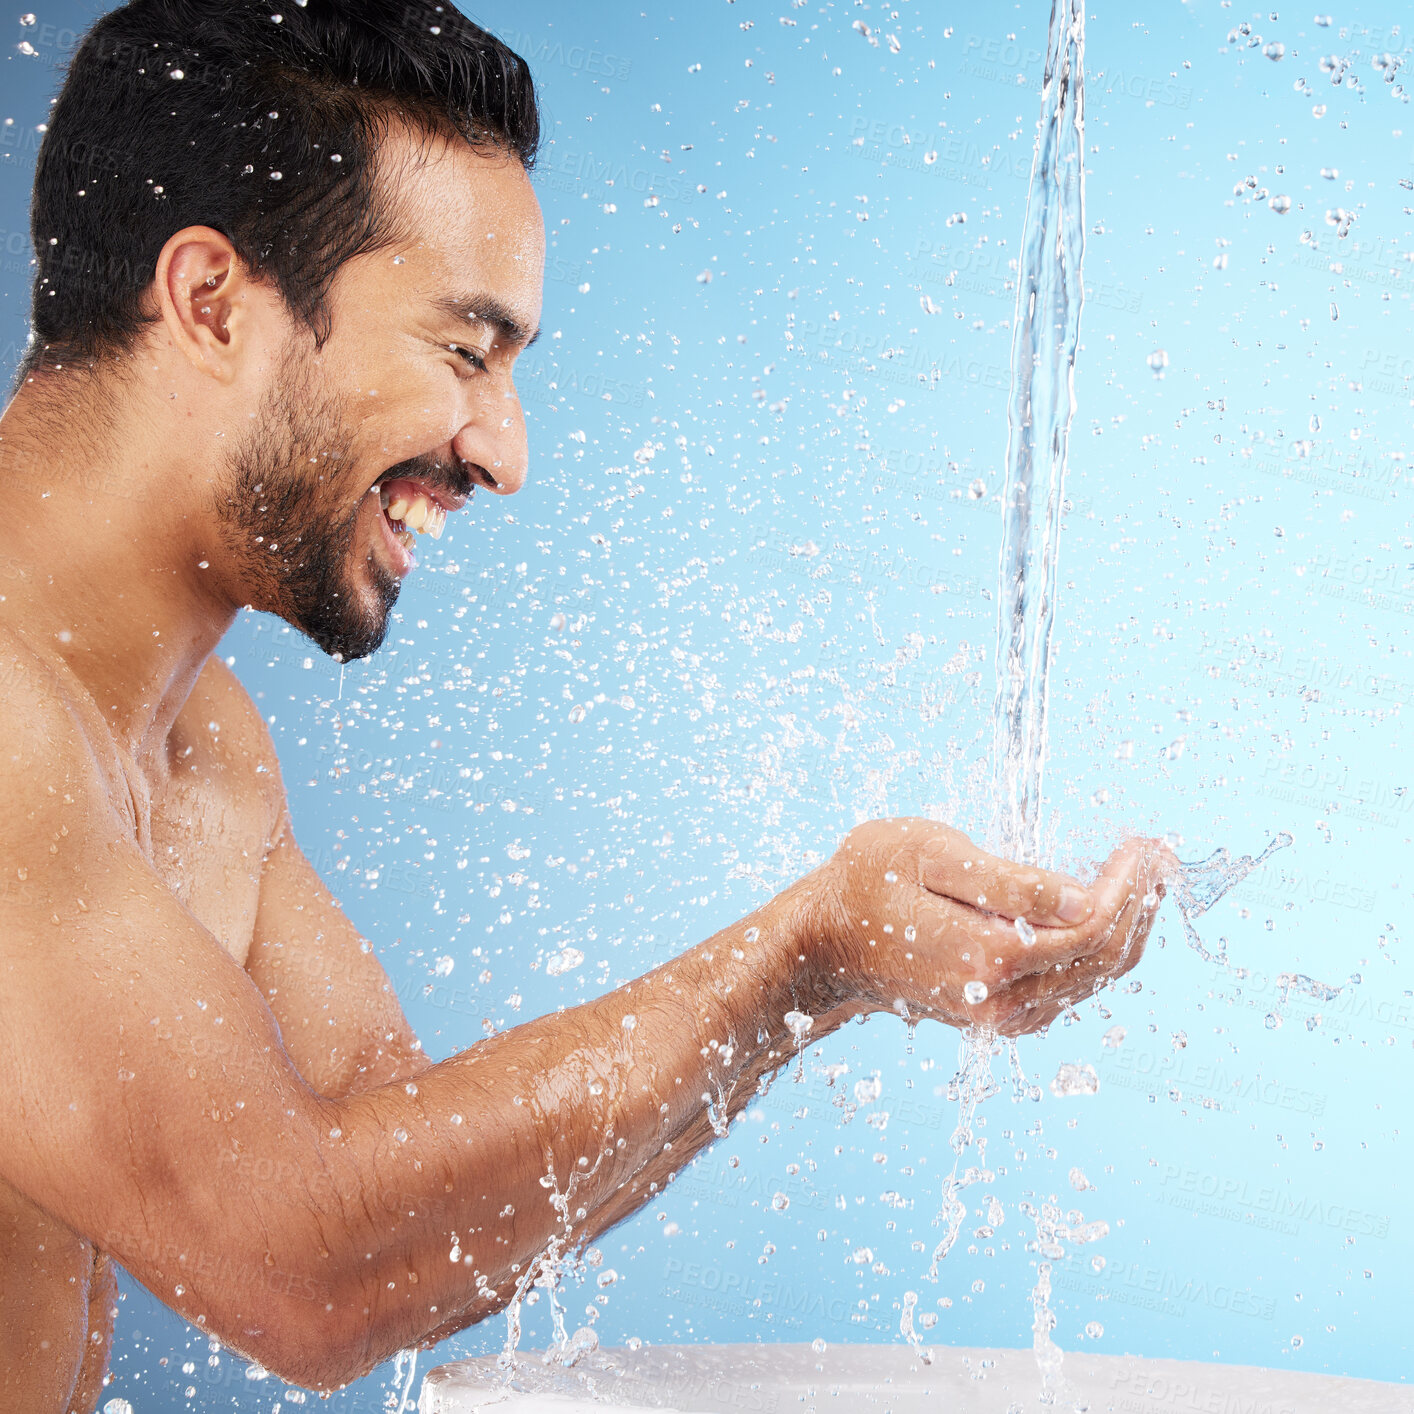 Buy stock photo Water, hands or man in shower in studio cleaning body for wellness or skincare with a happy smile. Water splash, mock up or relaxed model washing for self care grooming with marketing or mockup space